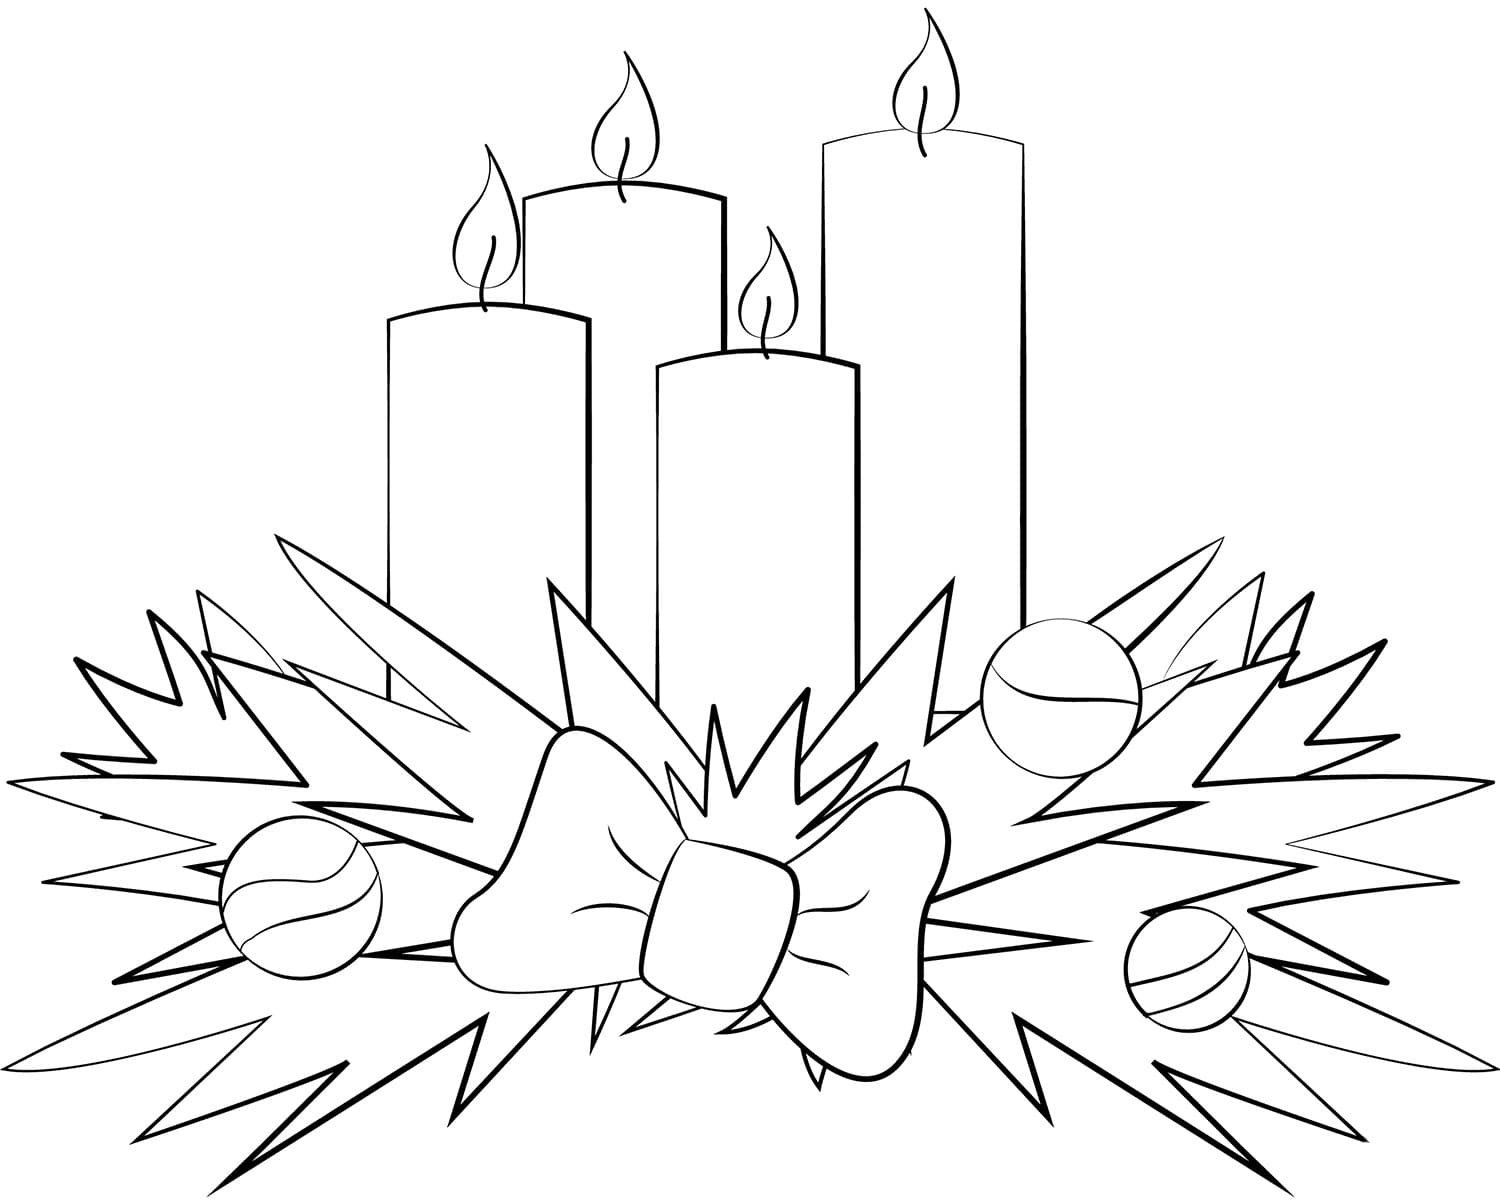 антистресс раскраска свечи | Christmas coloring pages, Coloring pages, Christmas colors